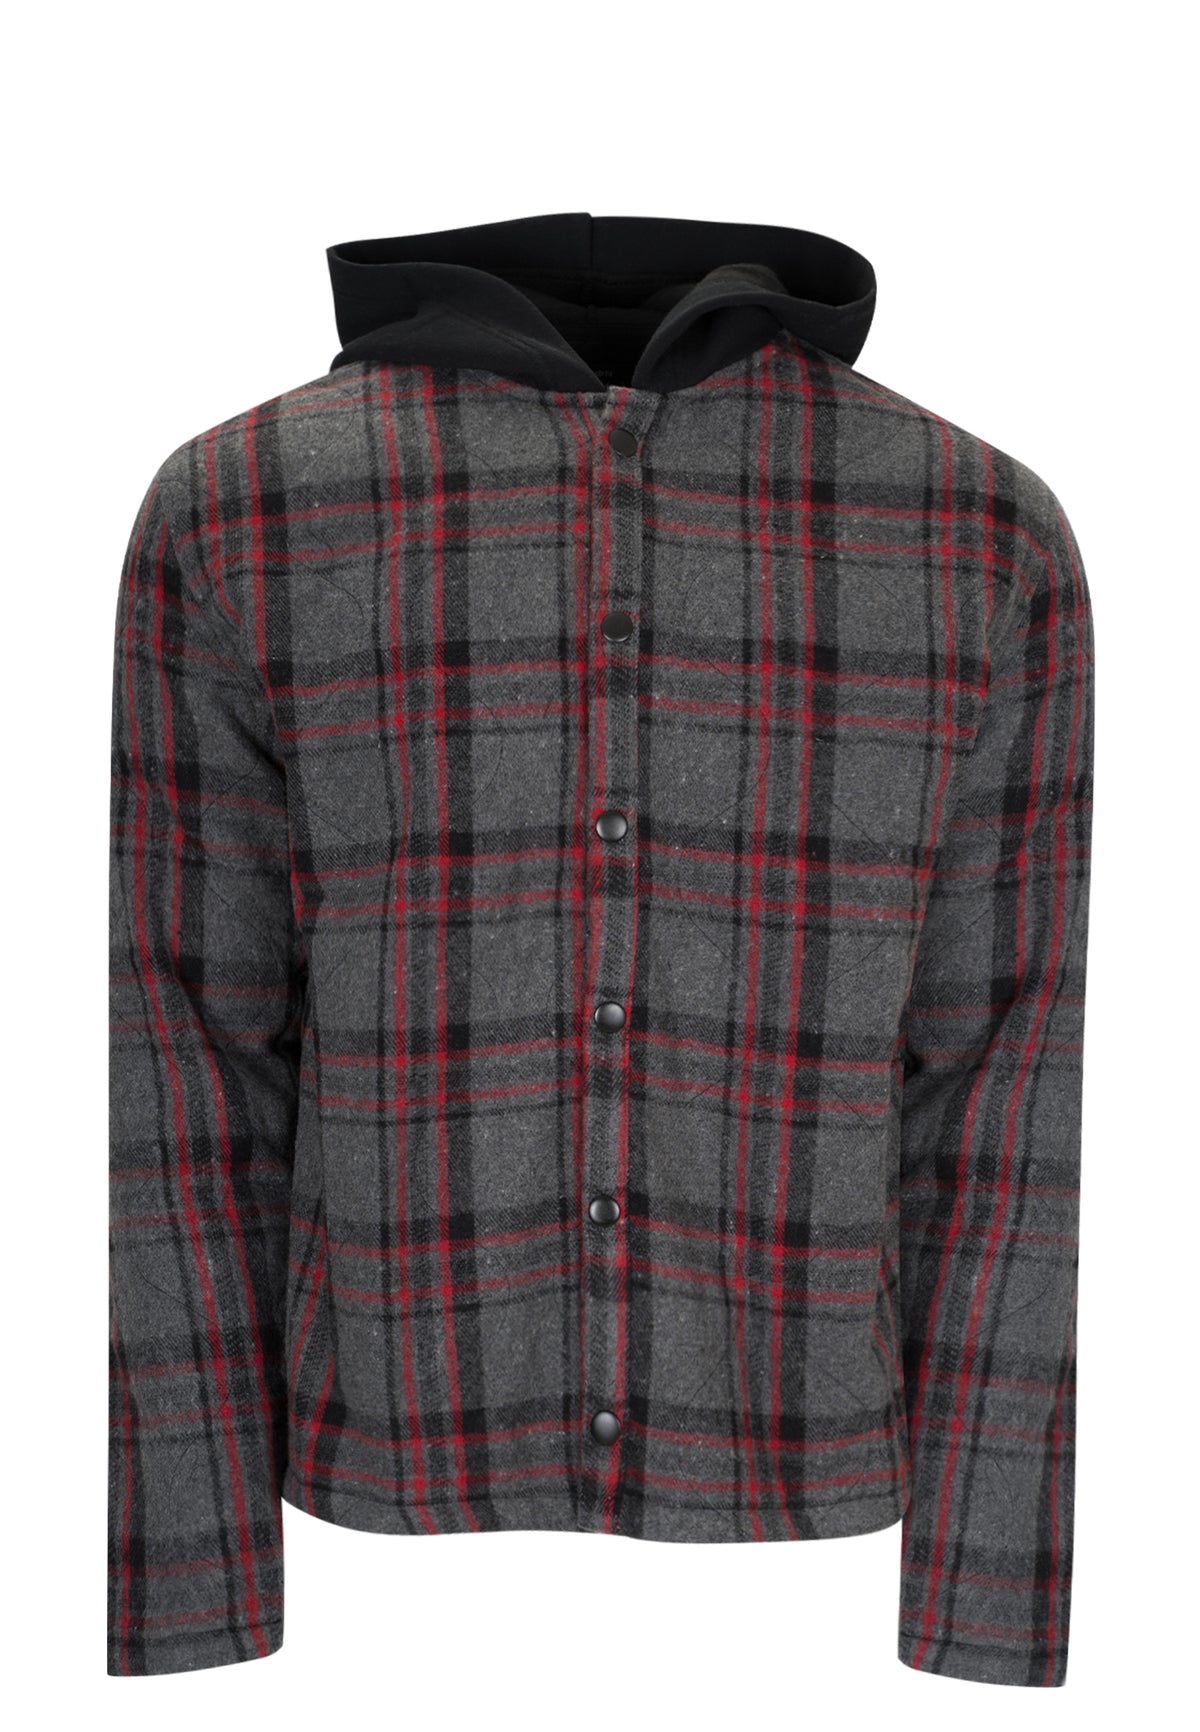 HOODED PADDED SHIRT CHARCOAL & RED